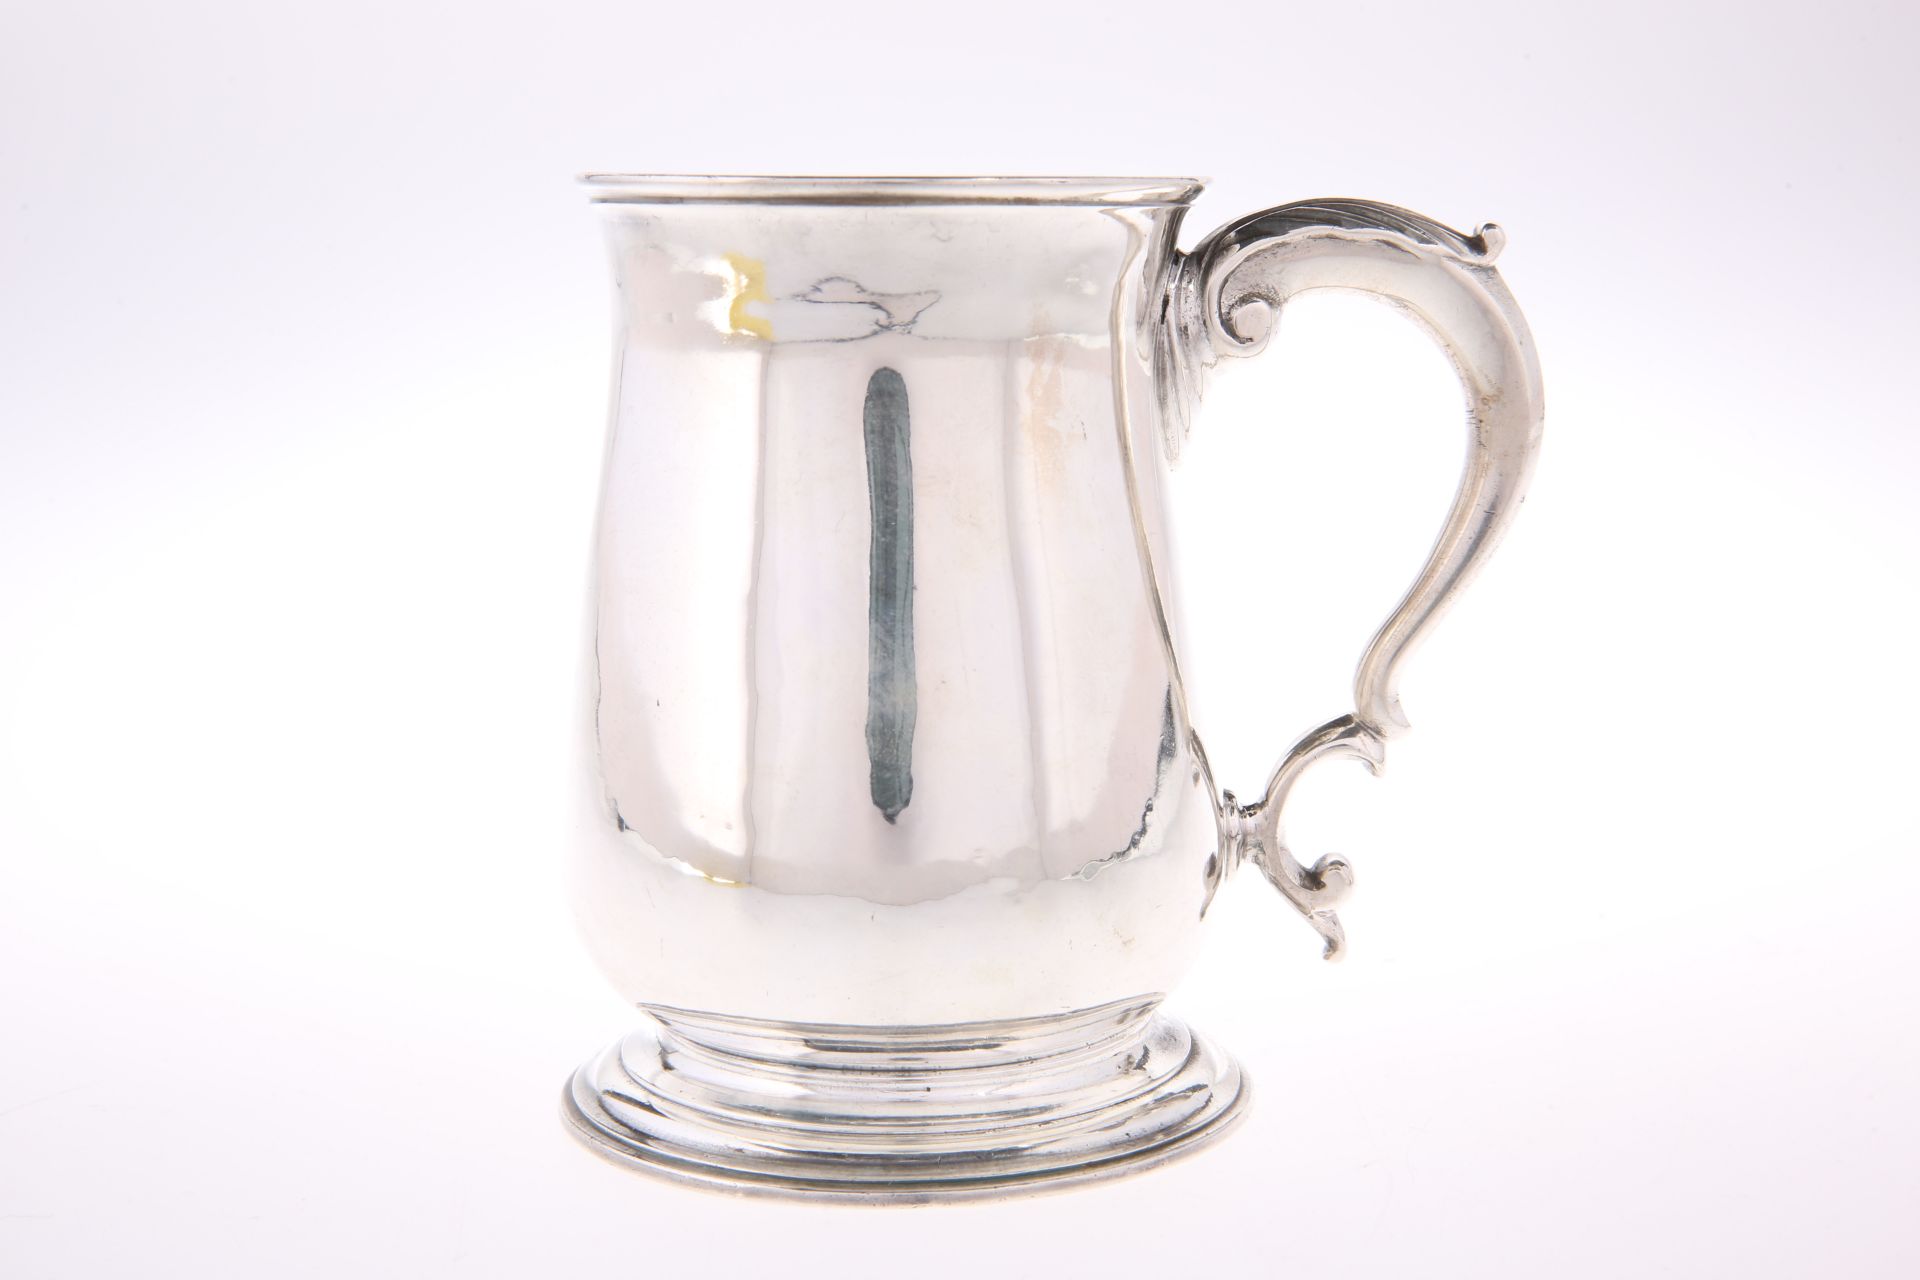 A GEORGE II SILVER MUG, by John Swift, London 1752, of baluster form with moulded foot, the